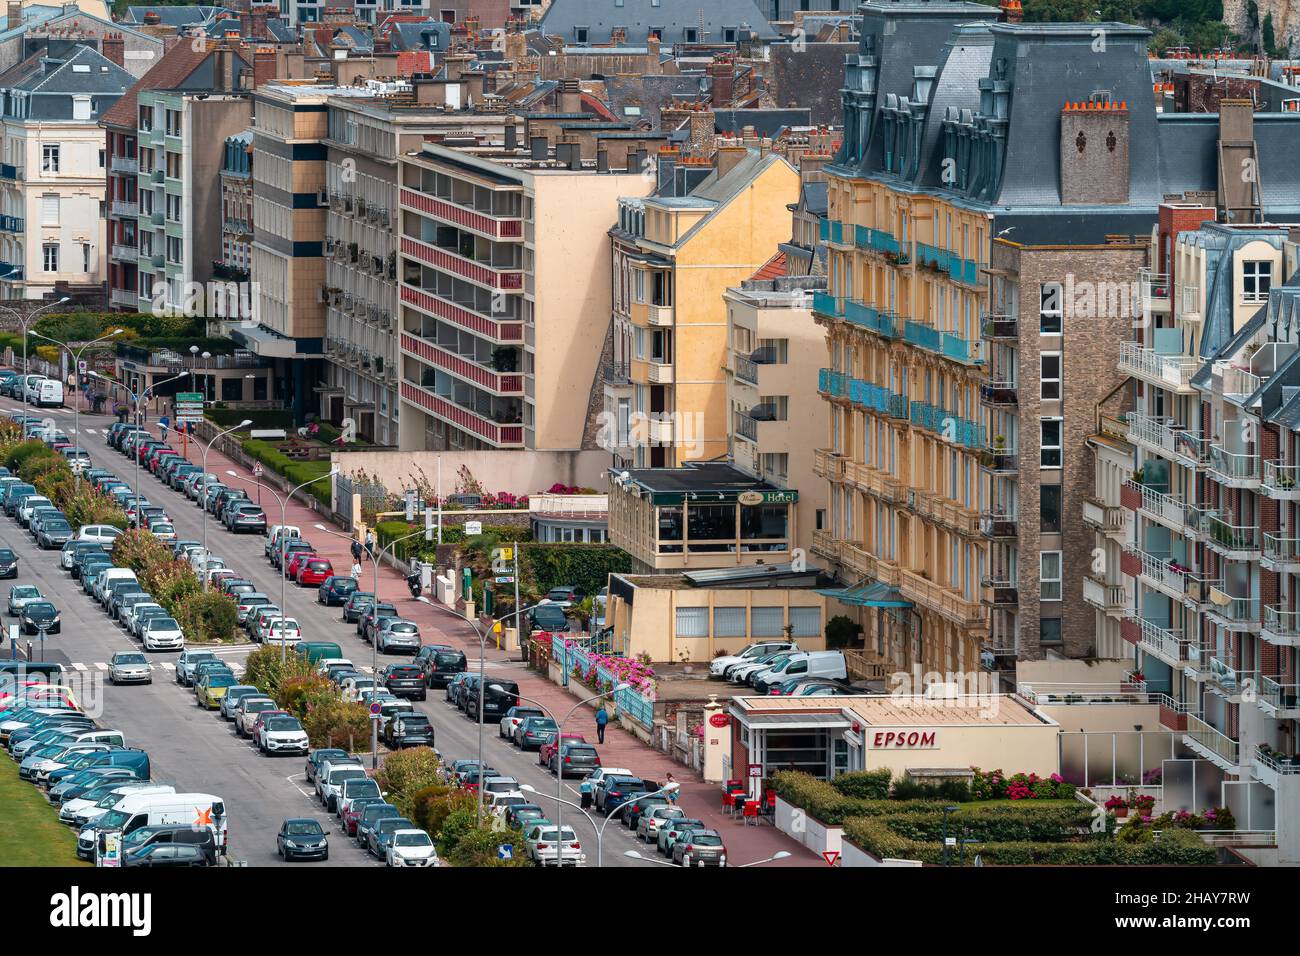 Dieppe, France - July 30, 2021: Cityscape of Dieppe with big residential buildings and cars parked along the streets Stock Photo